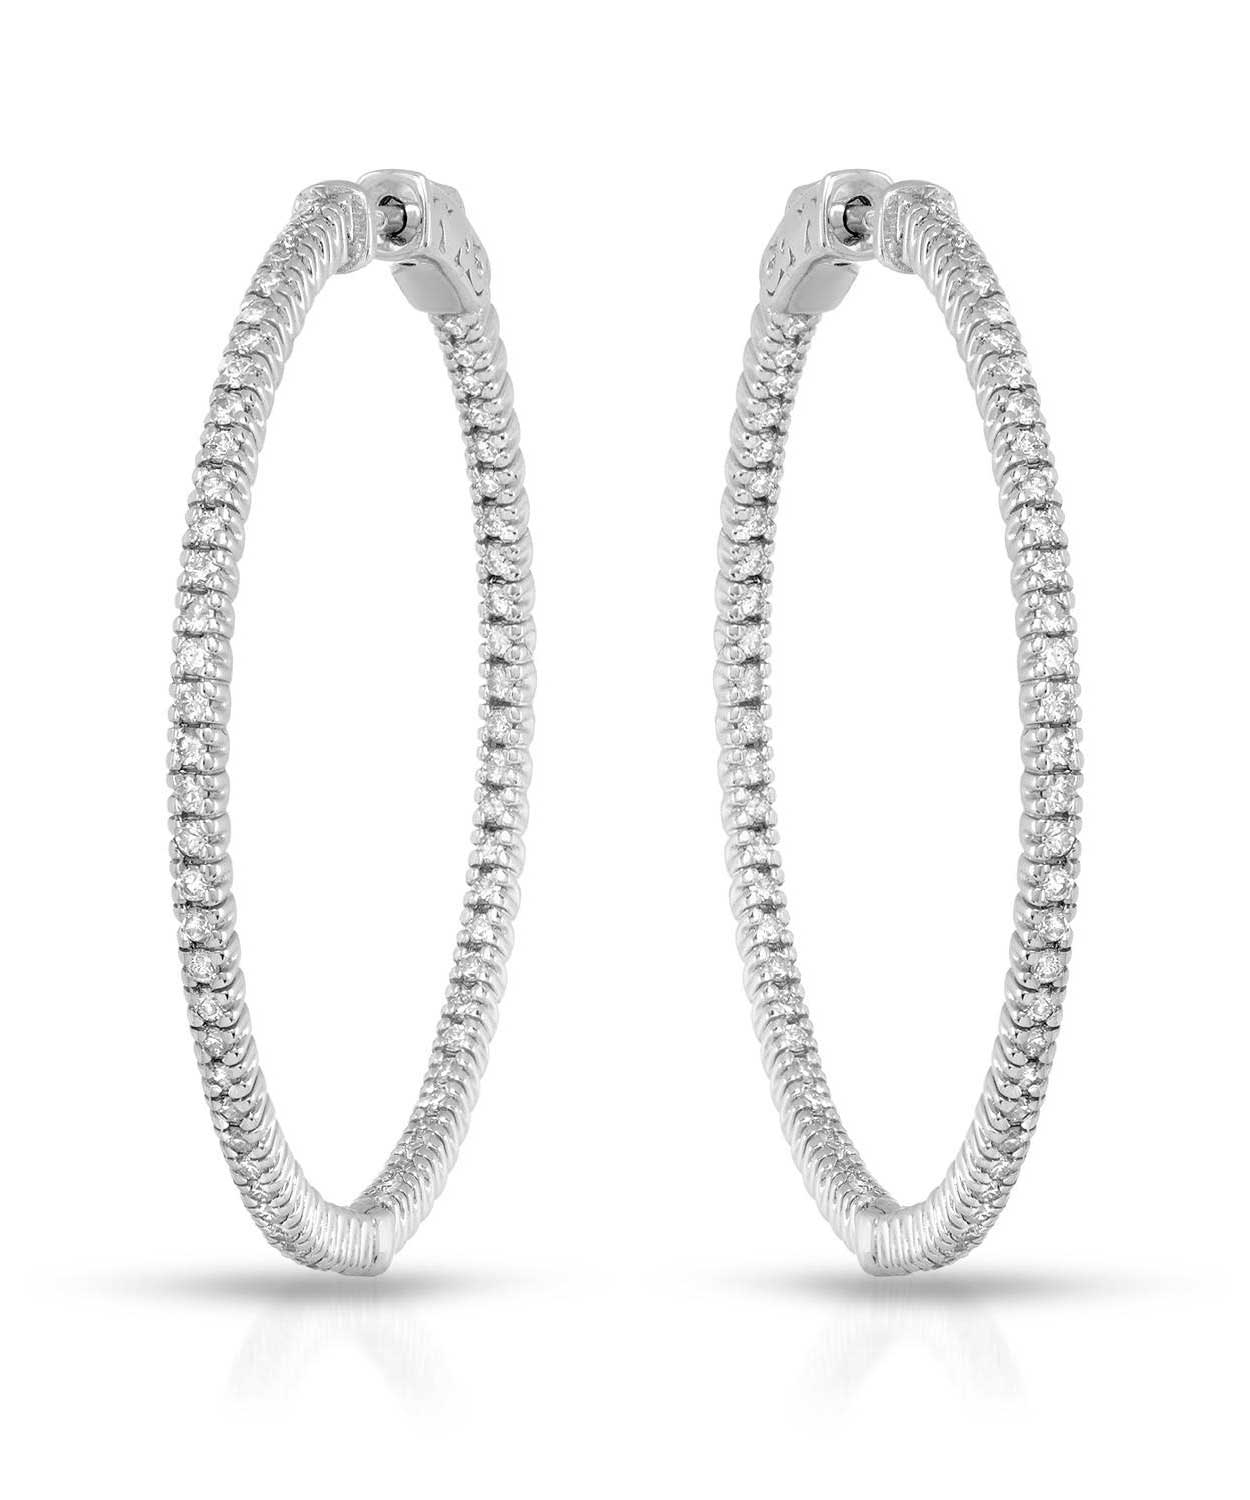 Signature Collection 1.21 ctw Diamond 14k White Gold Inside-Out Hoop Earrings View 1